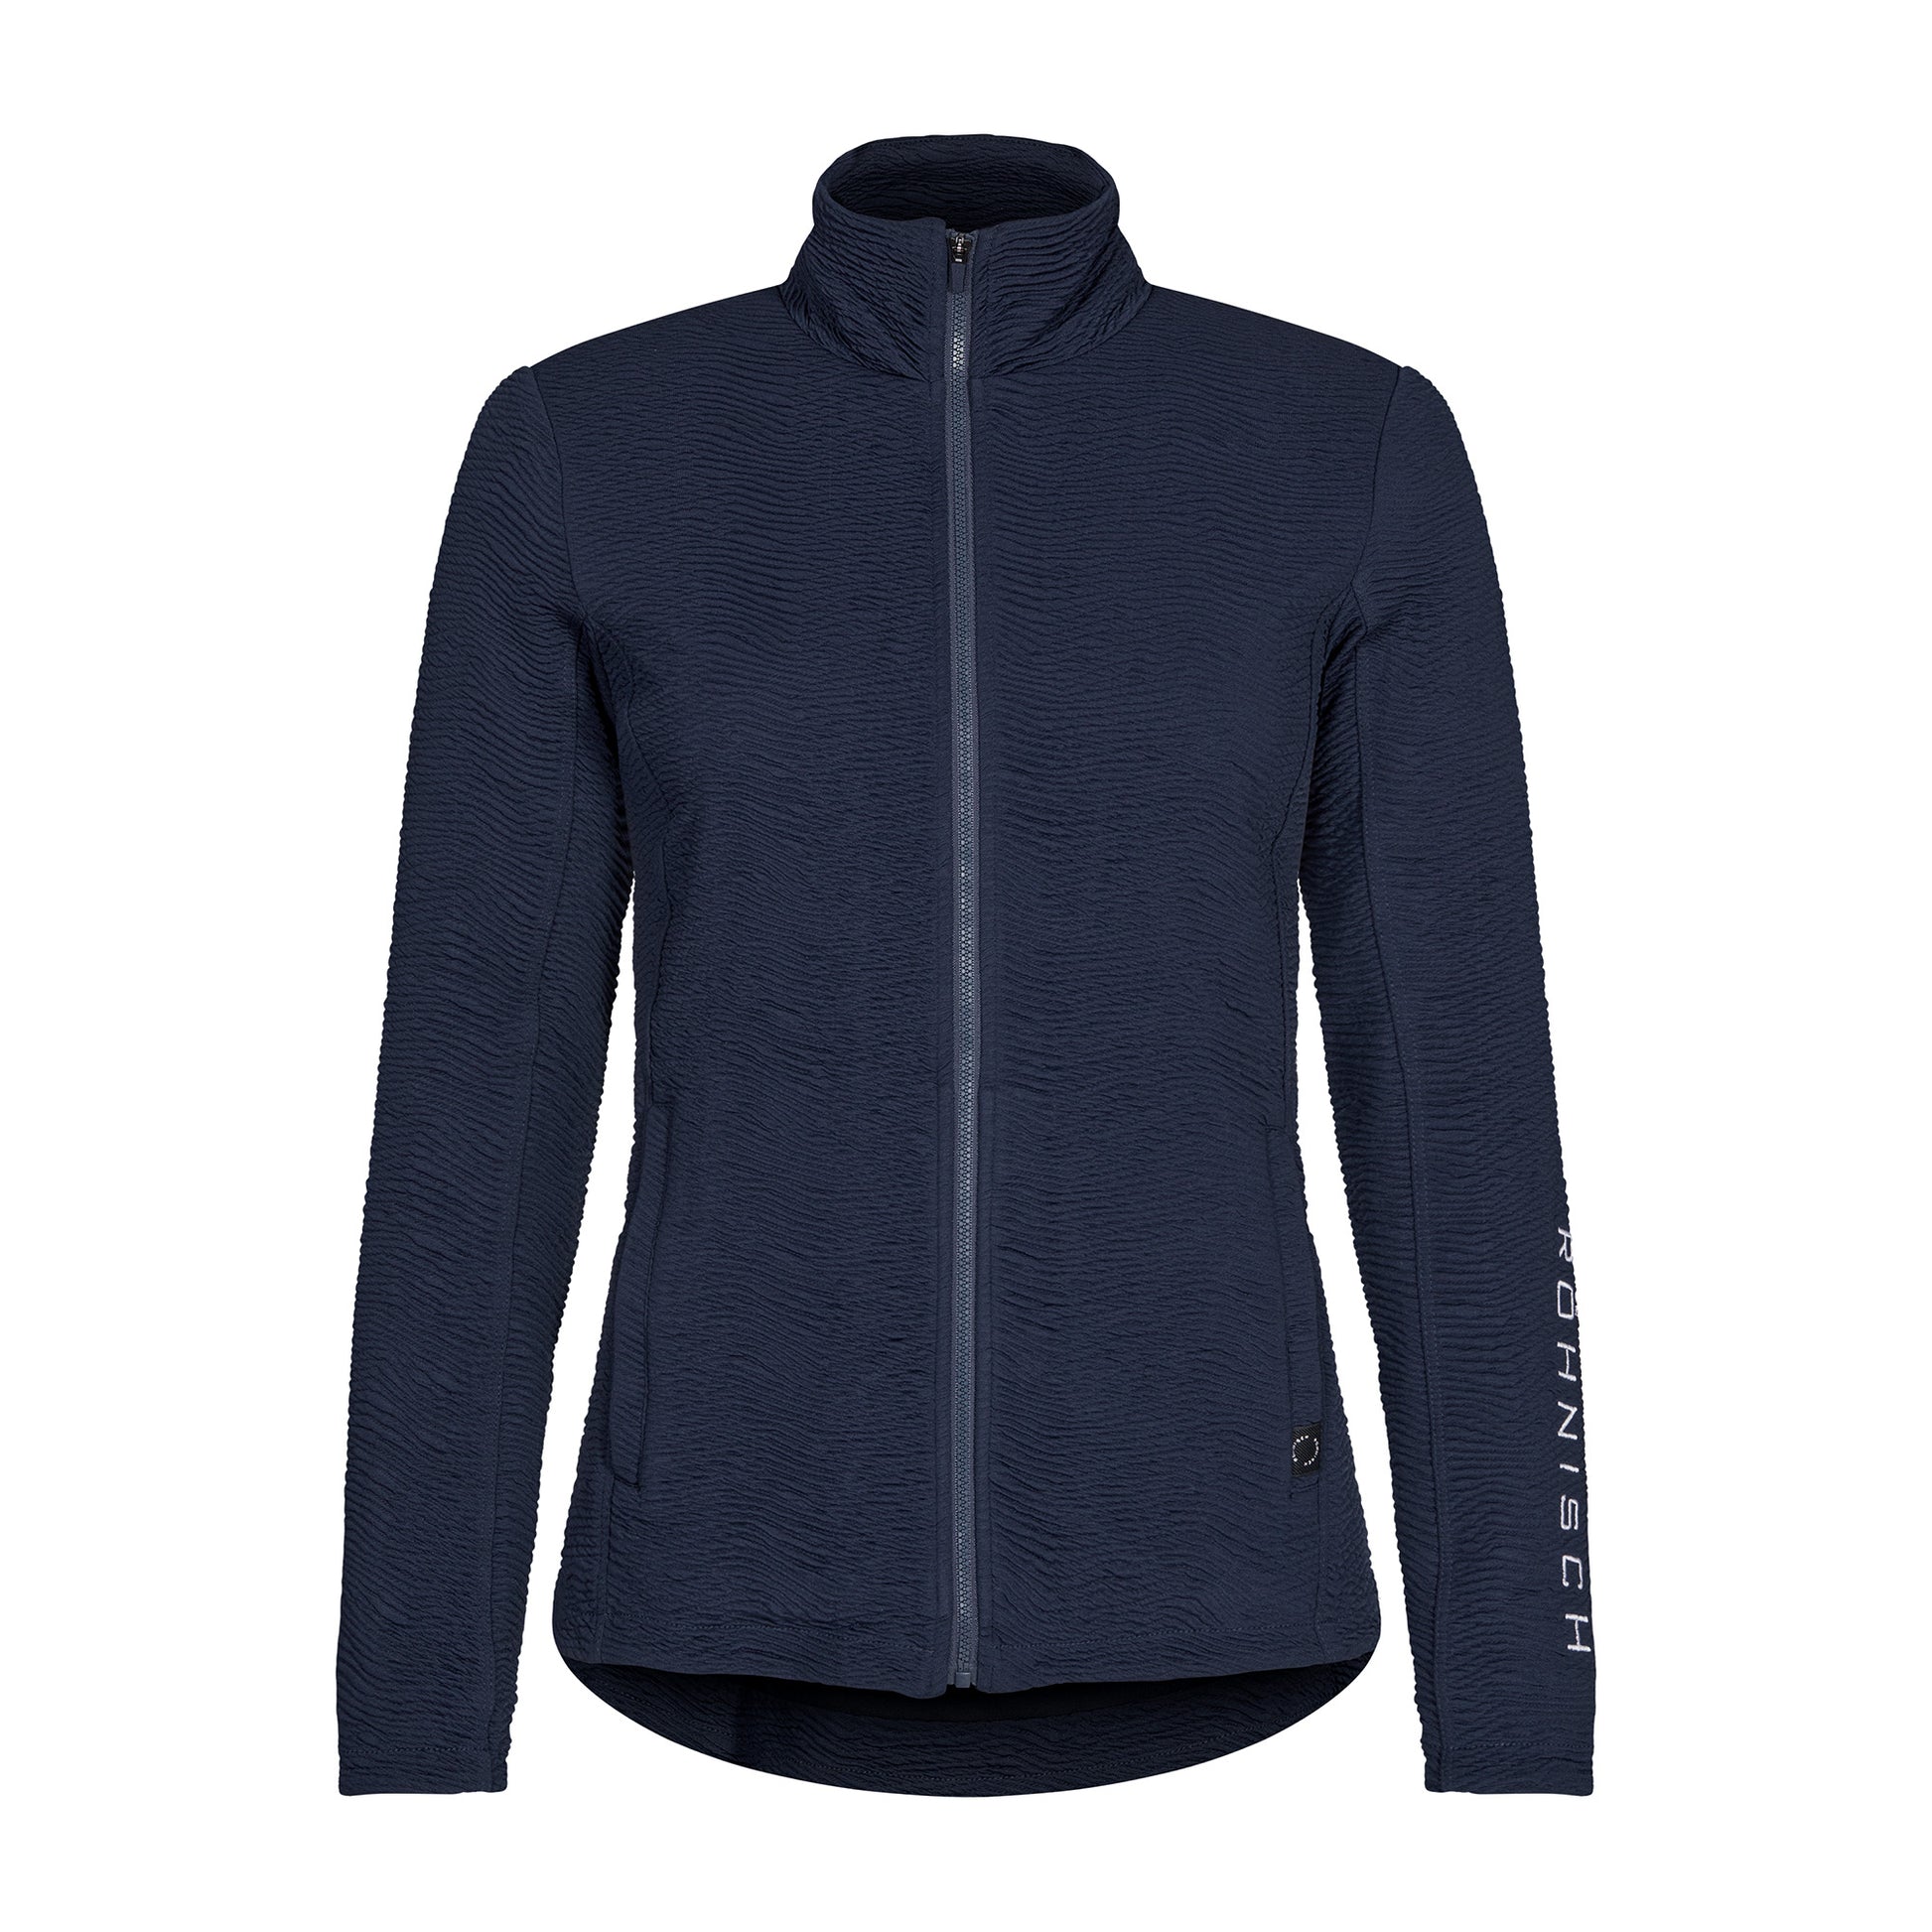 Rohnisch Ladies Fully Lined Ripple Textured Jacket in Navy - Last One XL Only Left